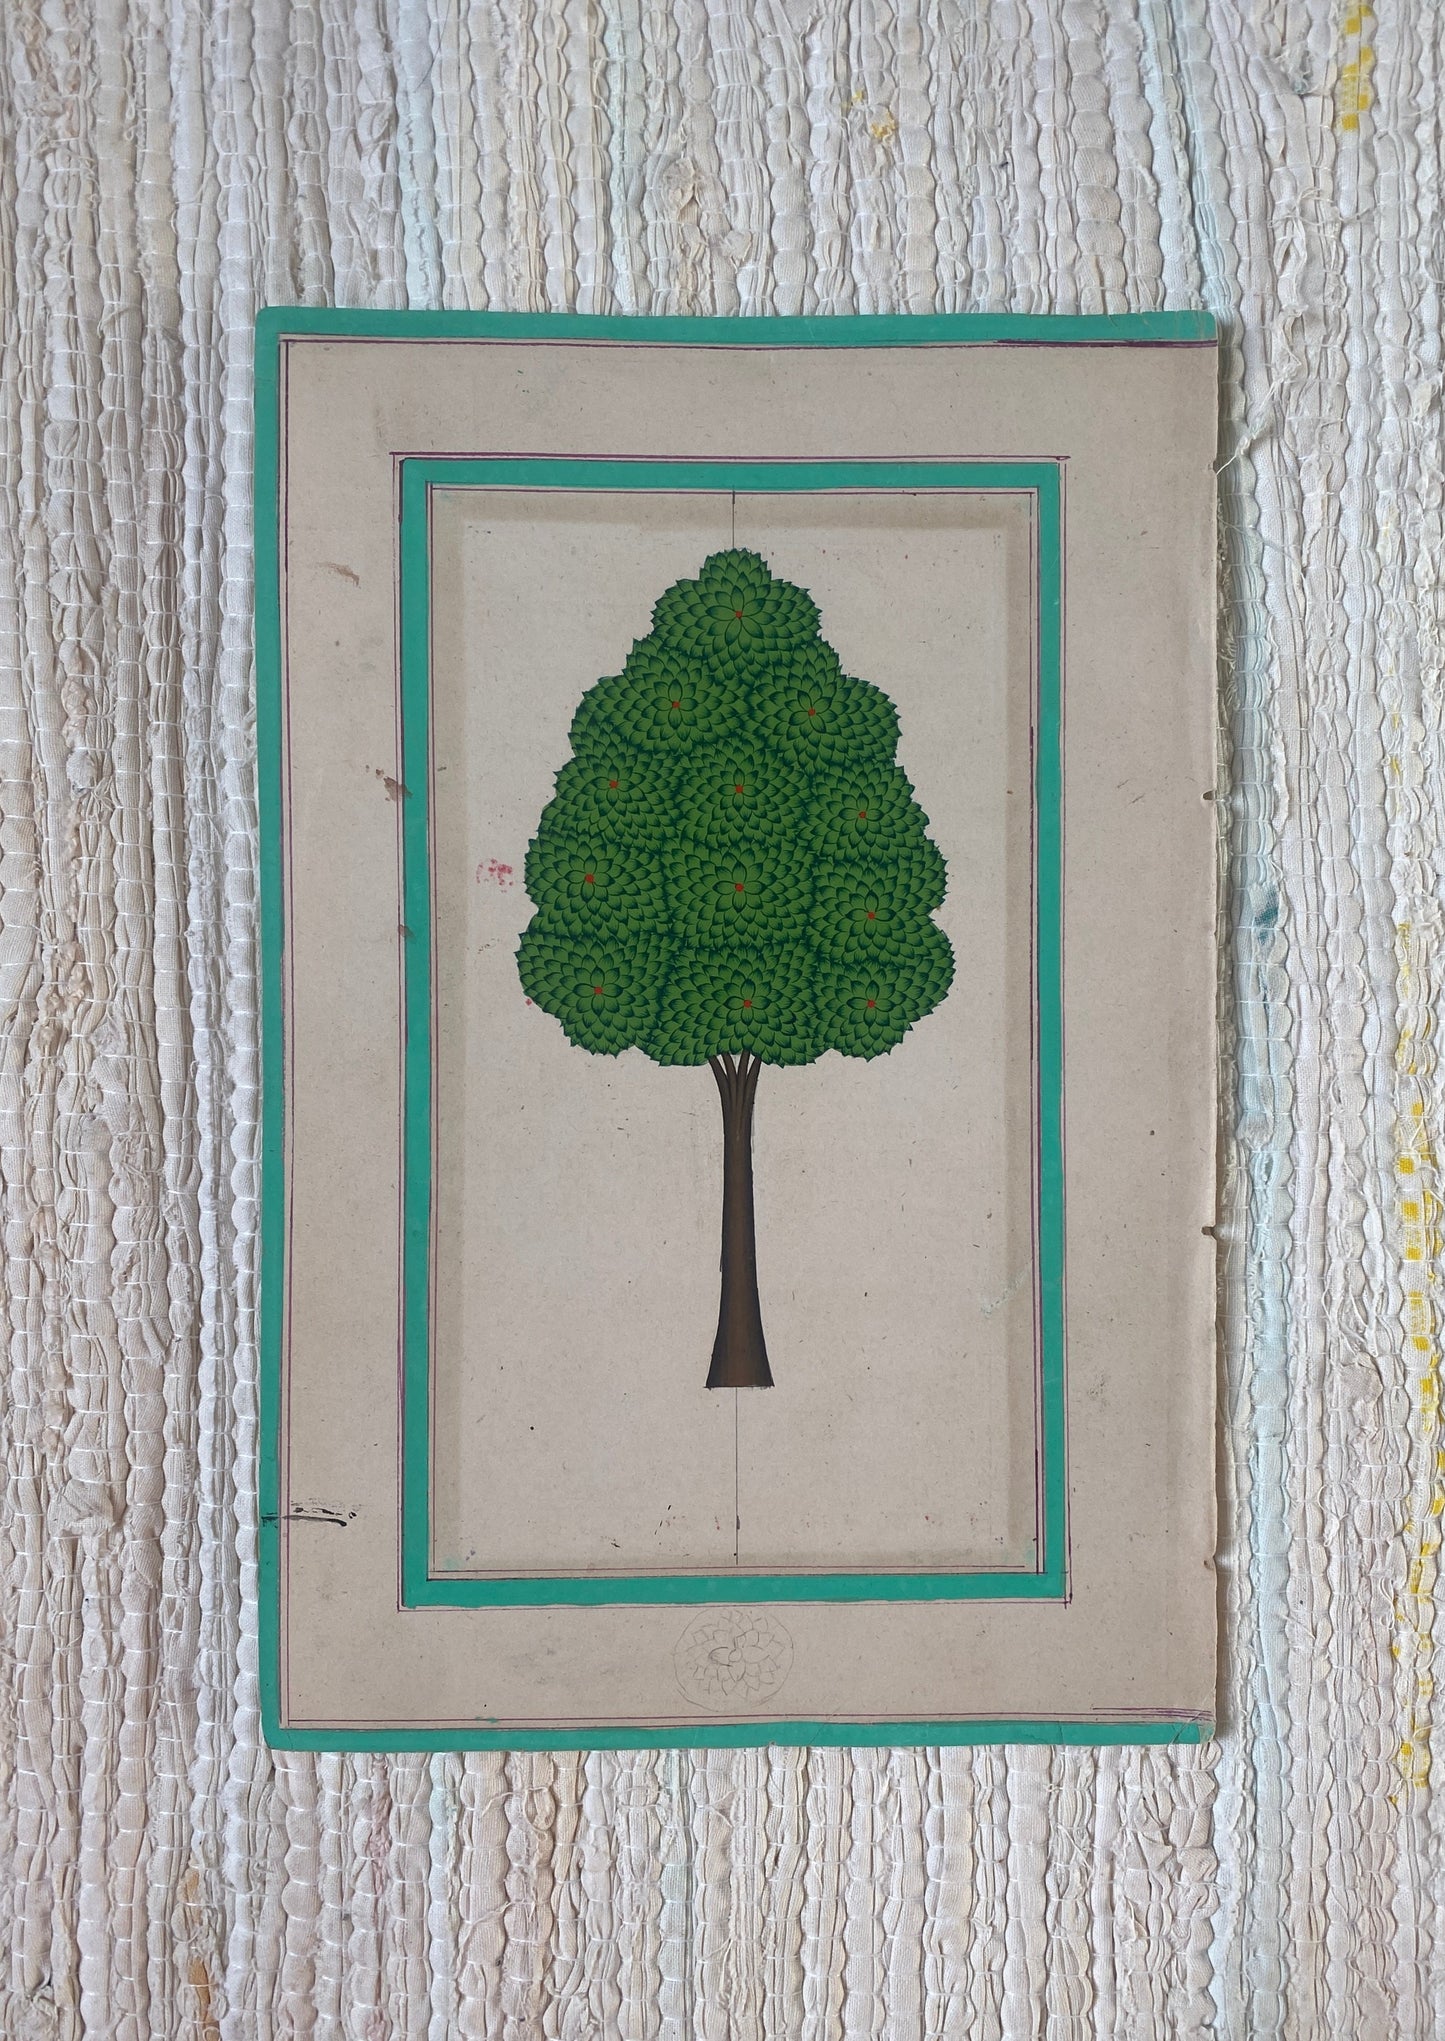 Tree Painting with Turquoise Border